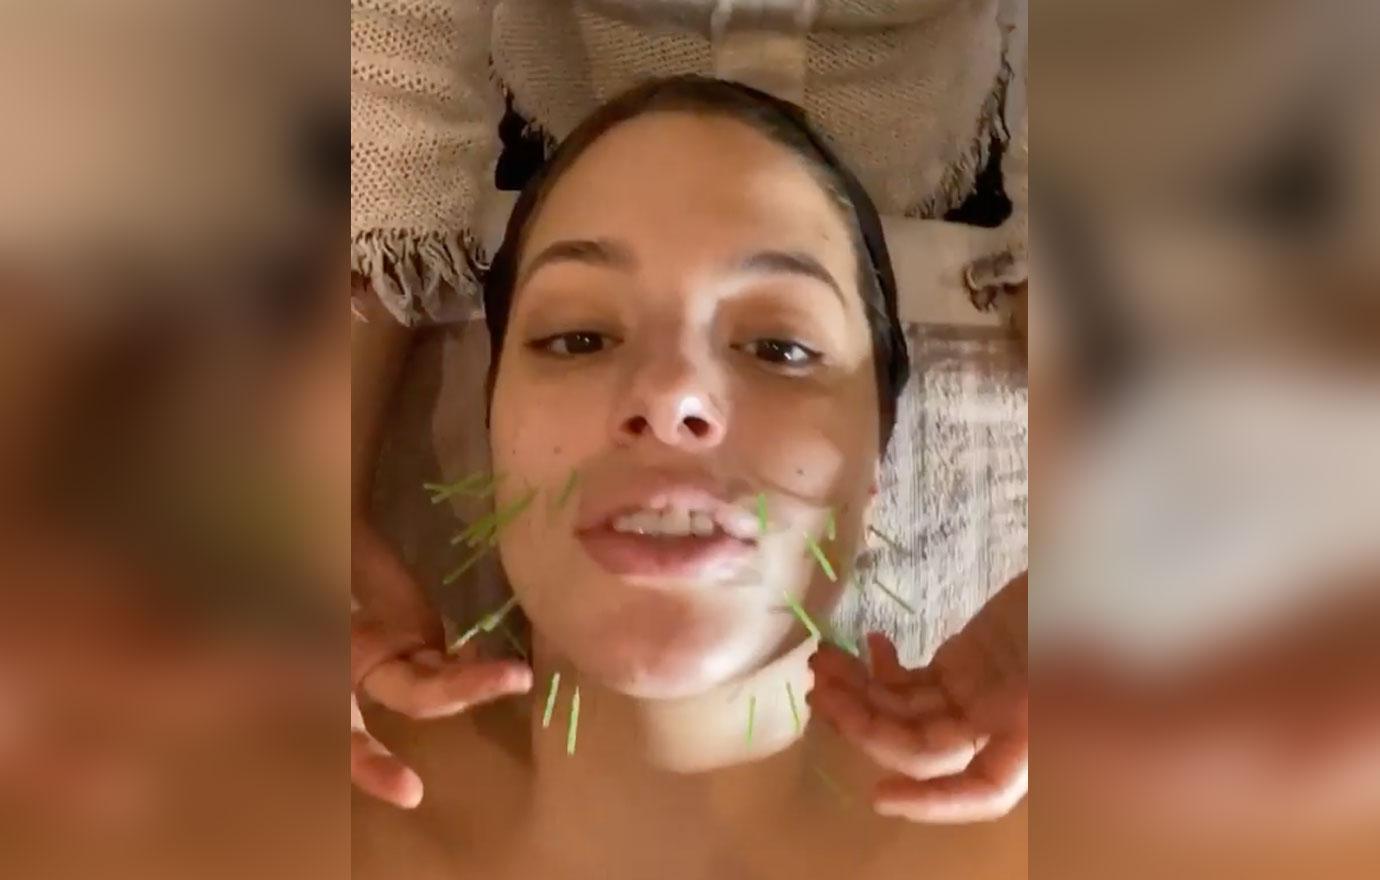 Ashley Graham Gets Facial Acupuncture in New Video